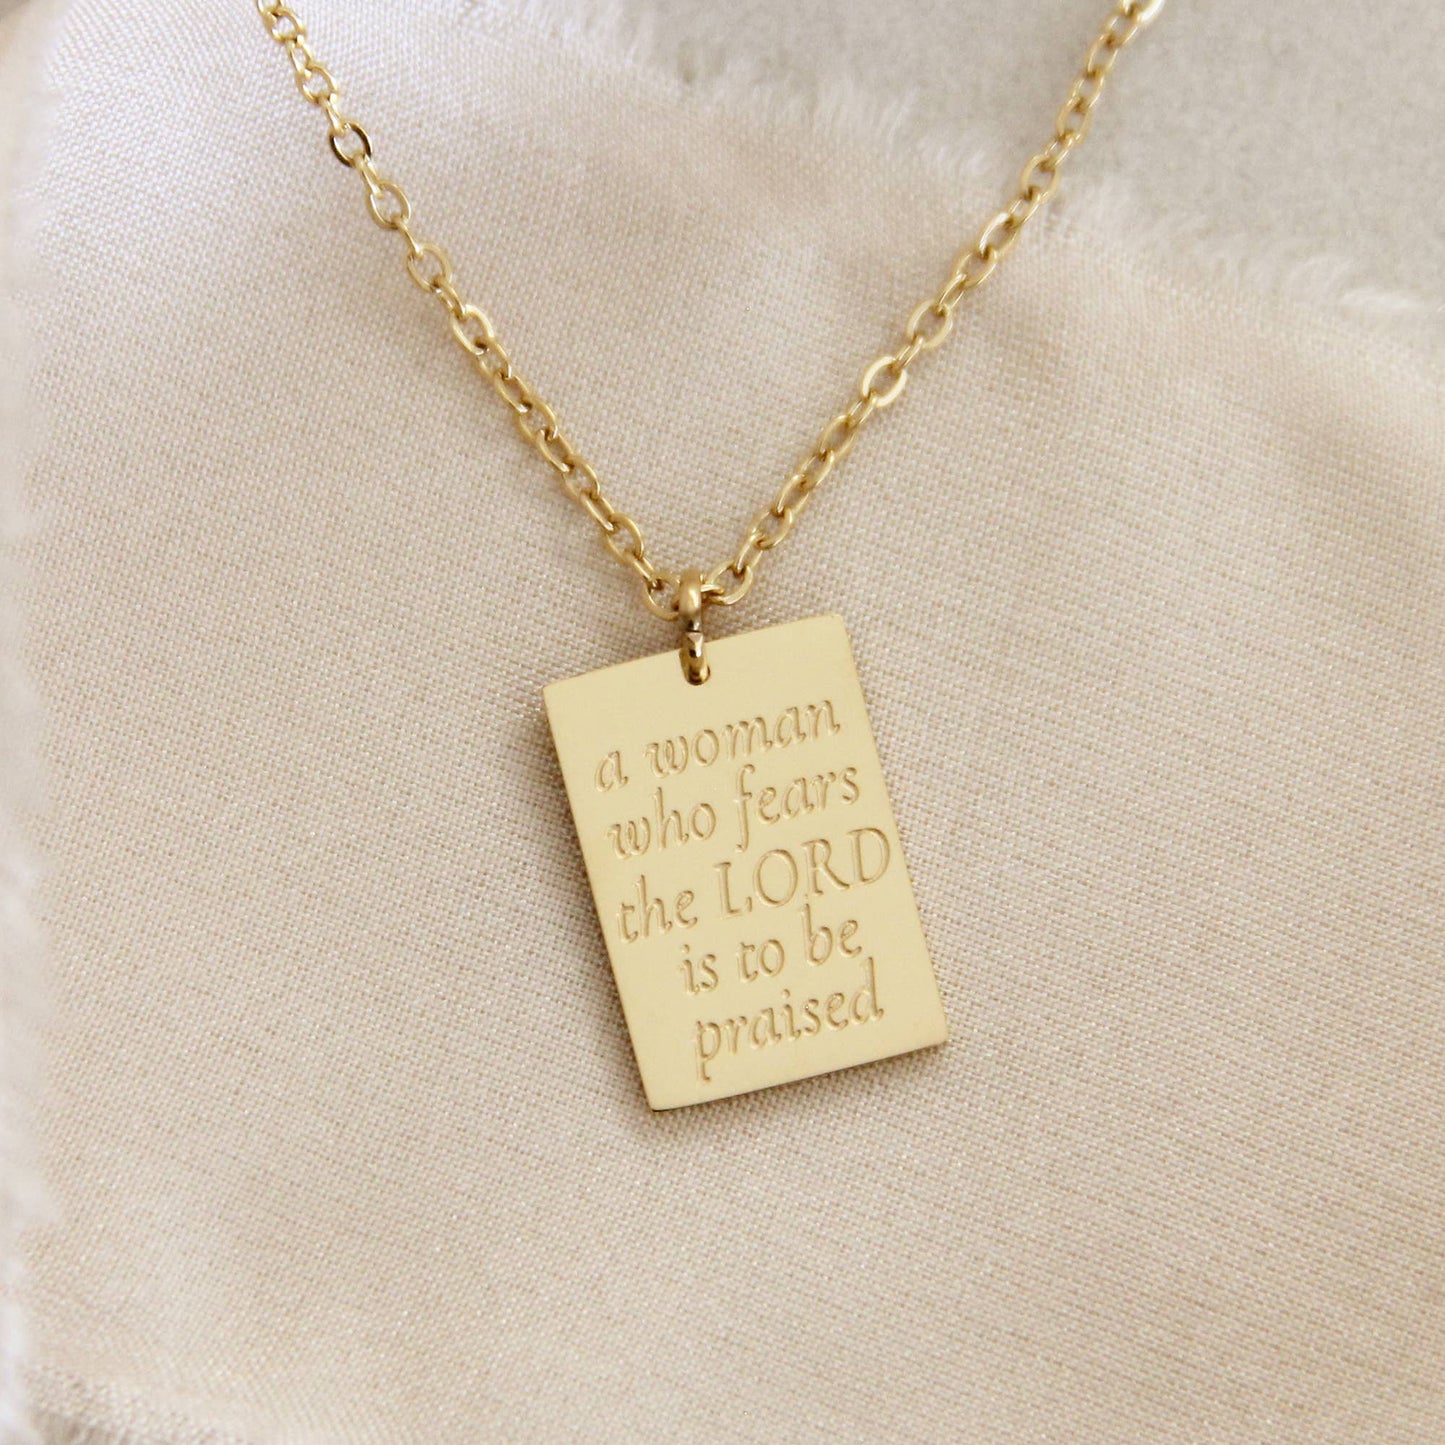 Proverbs 31 Necklace, A Woman Who Fears the Lord